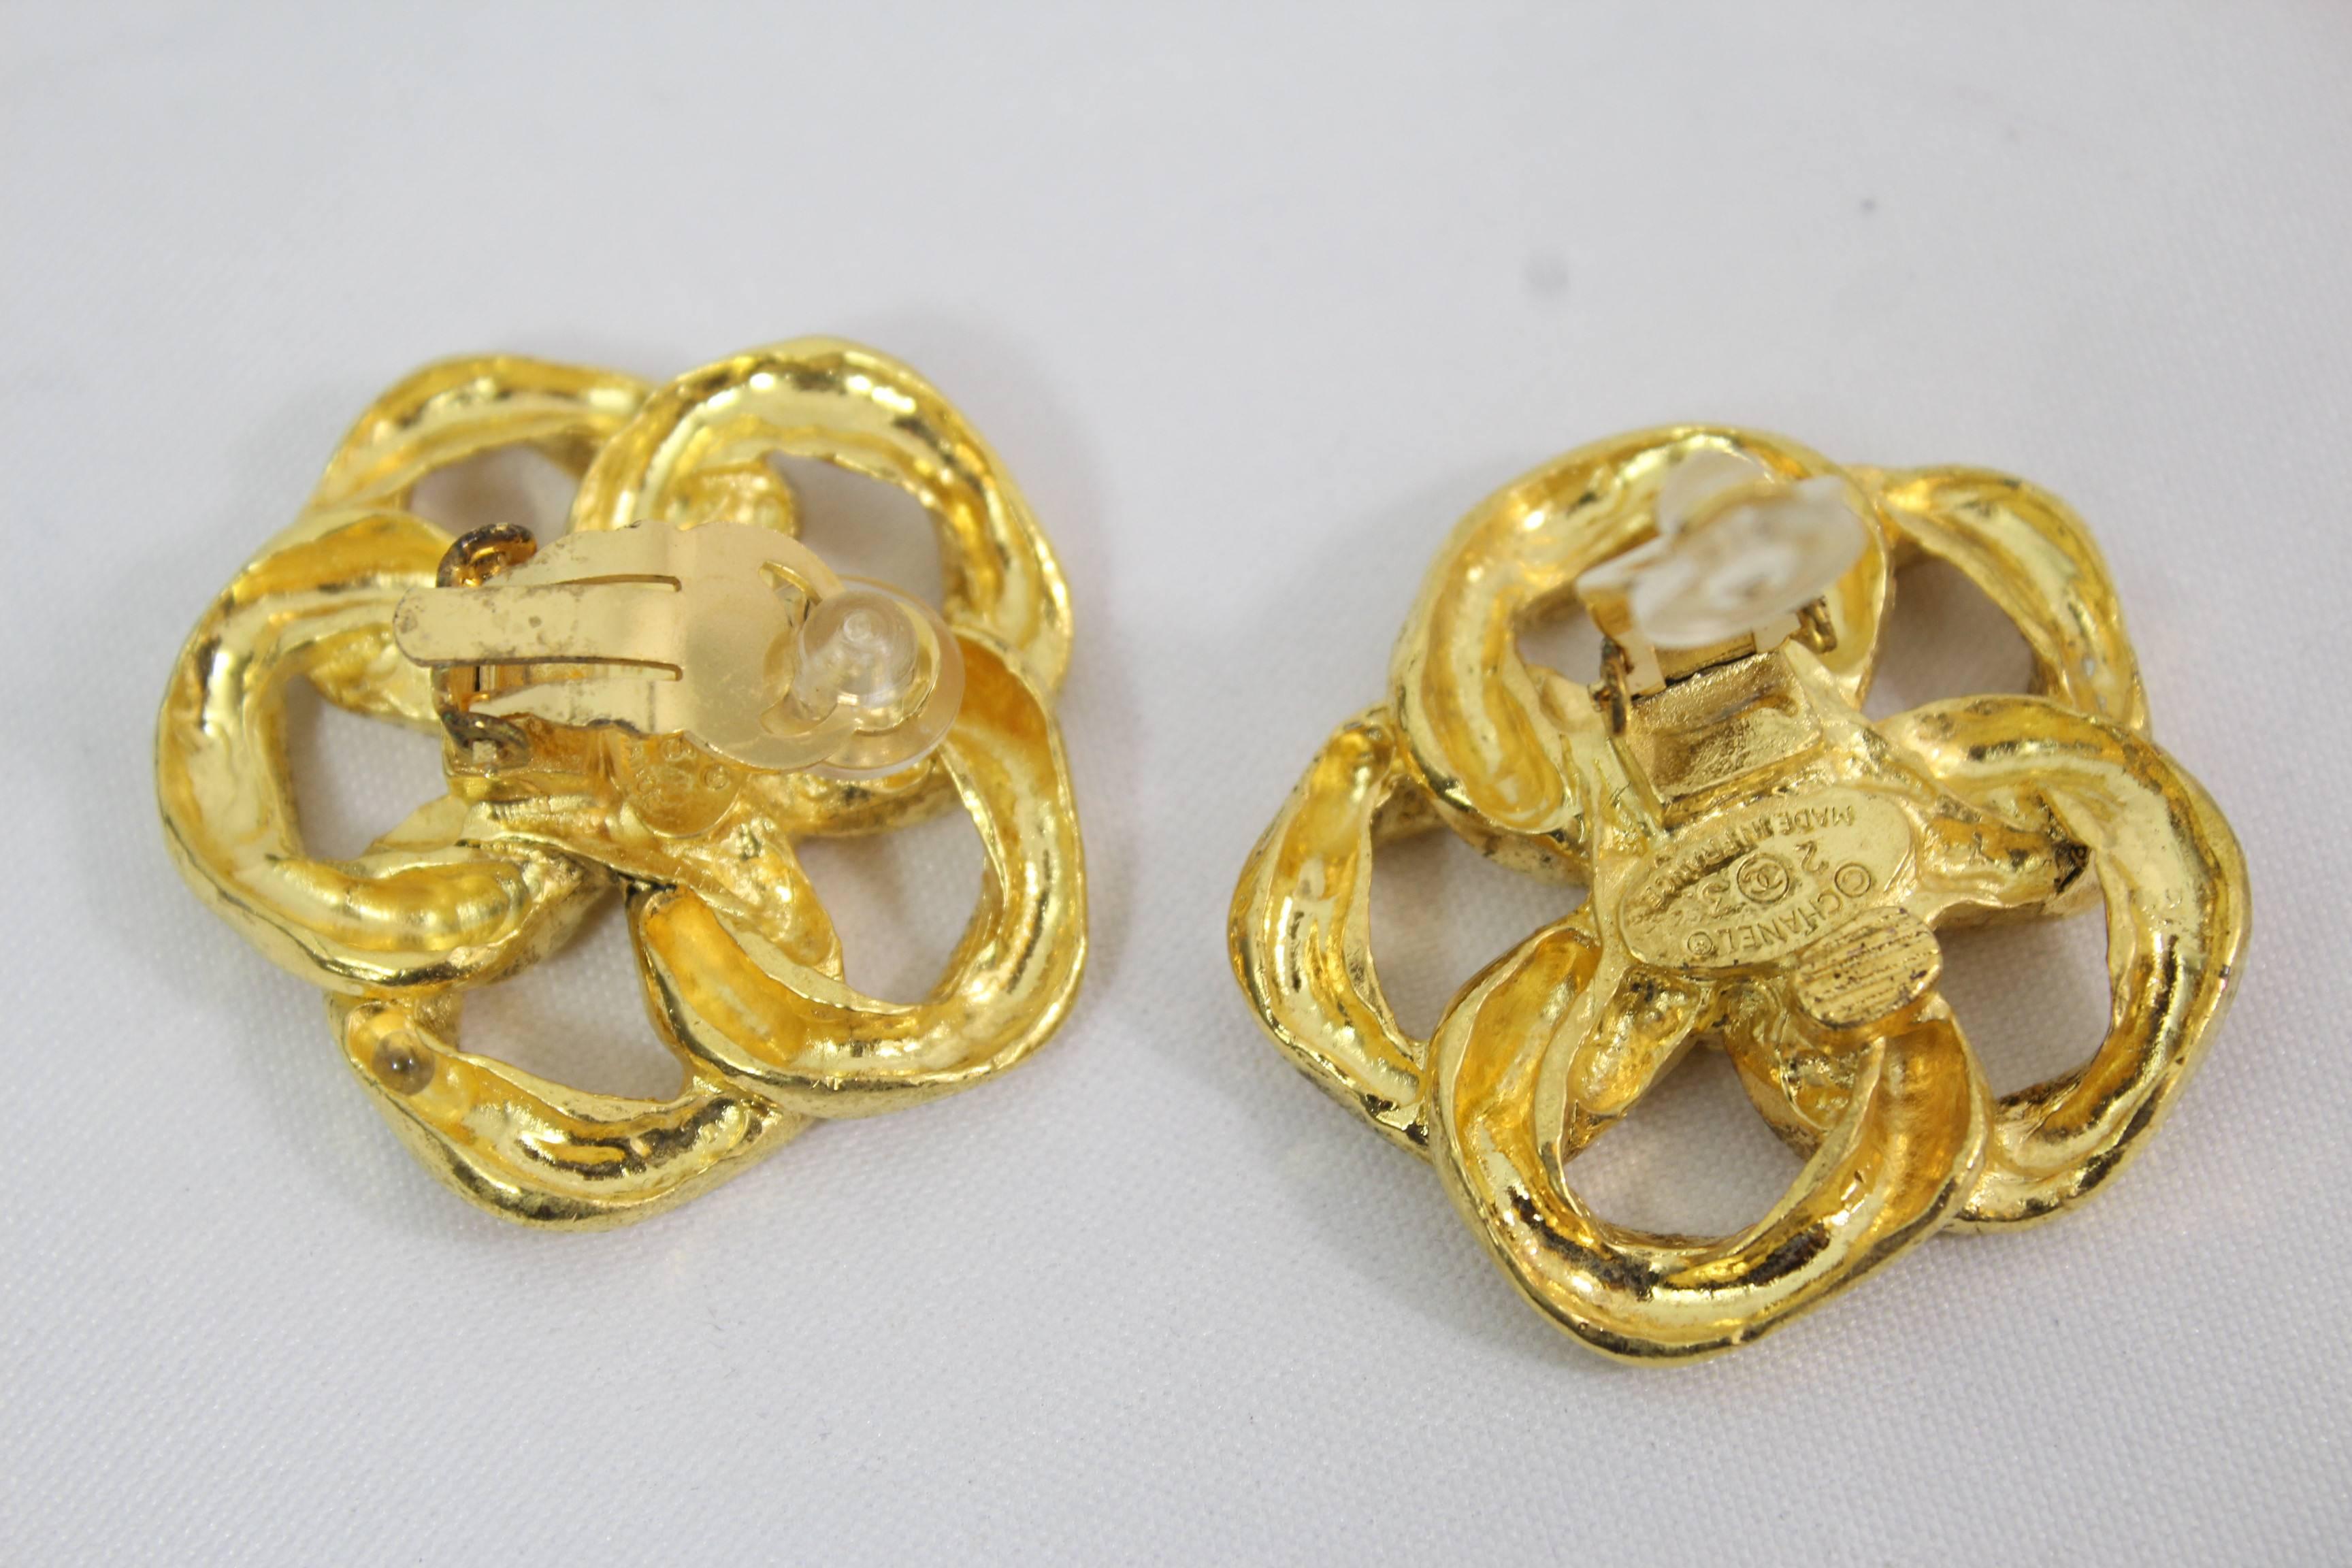 Awesome pair of Chanel Earrings in gold plated metal.

Clip system

Signed in the back

1.5 inches